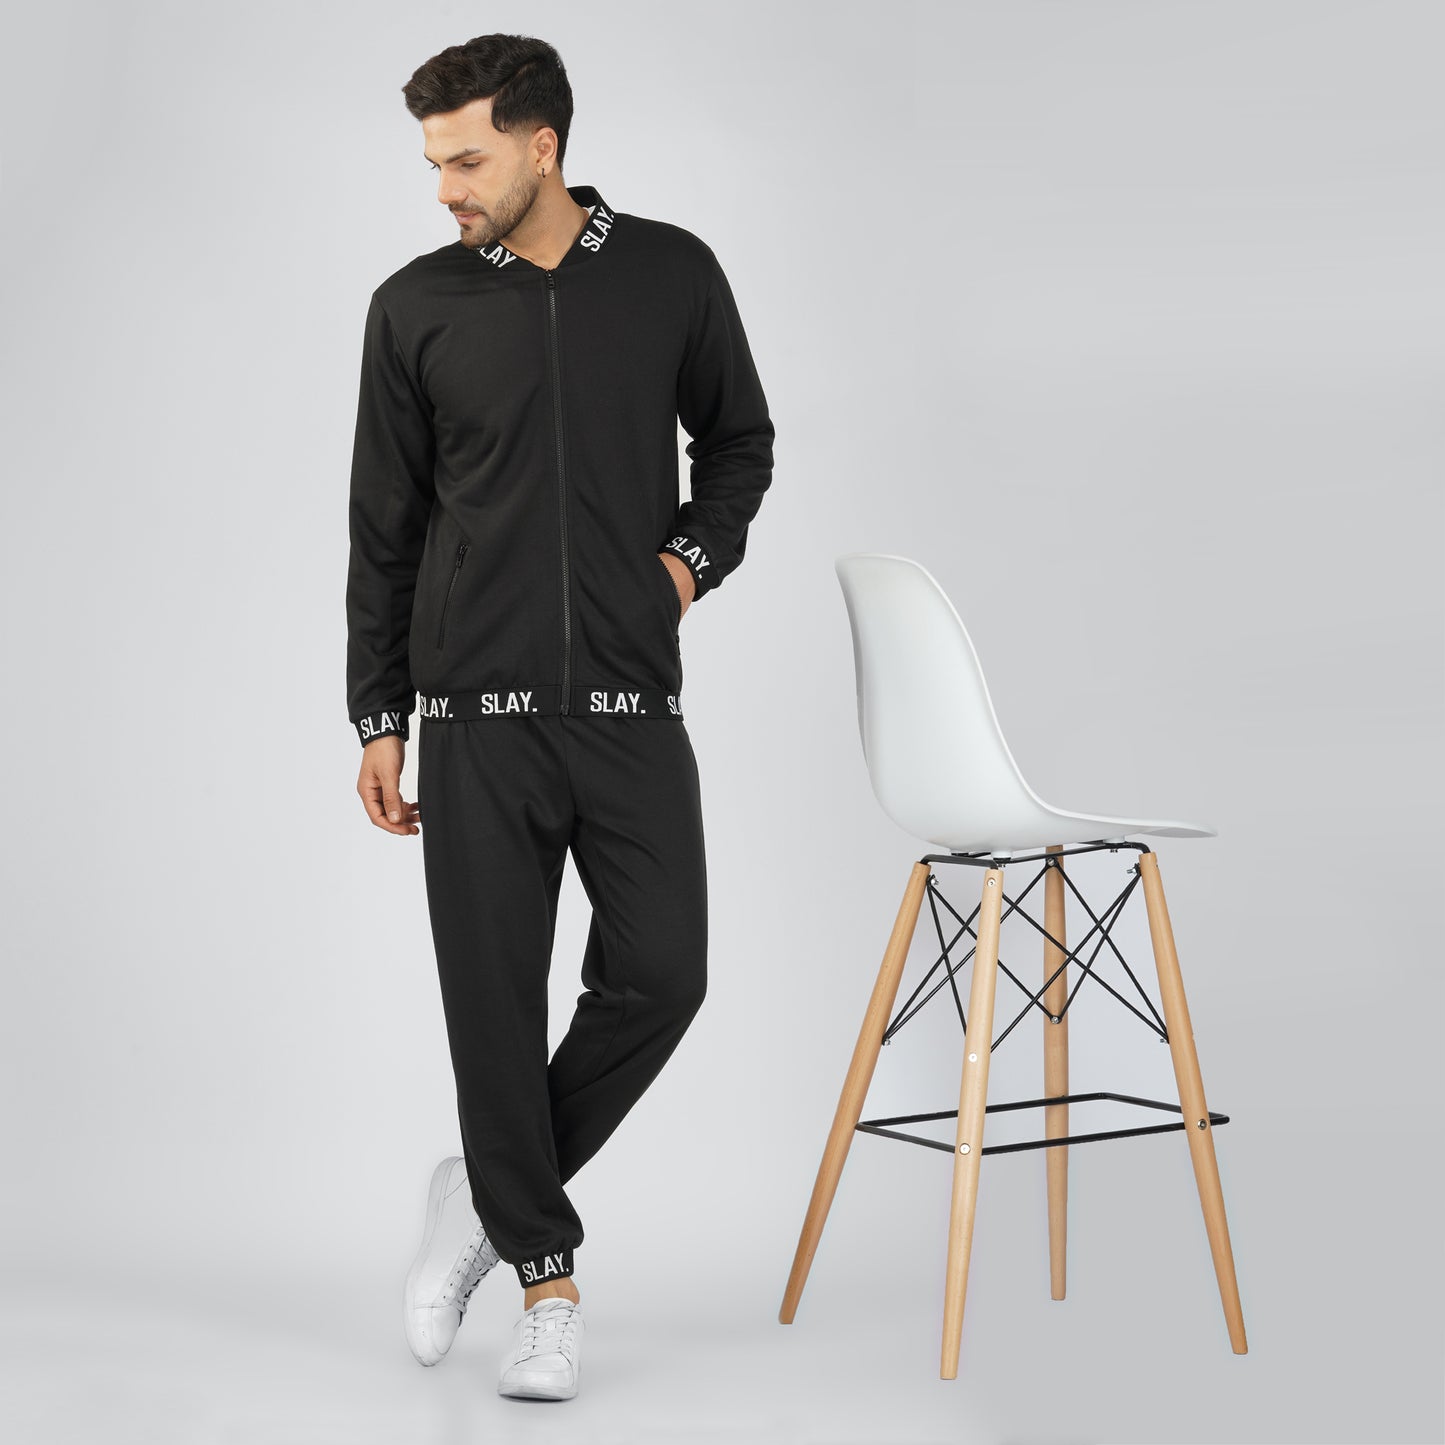 SLAY. Classic Men's Limited Edition Black Tracksuit